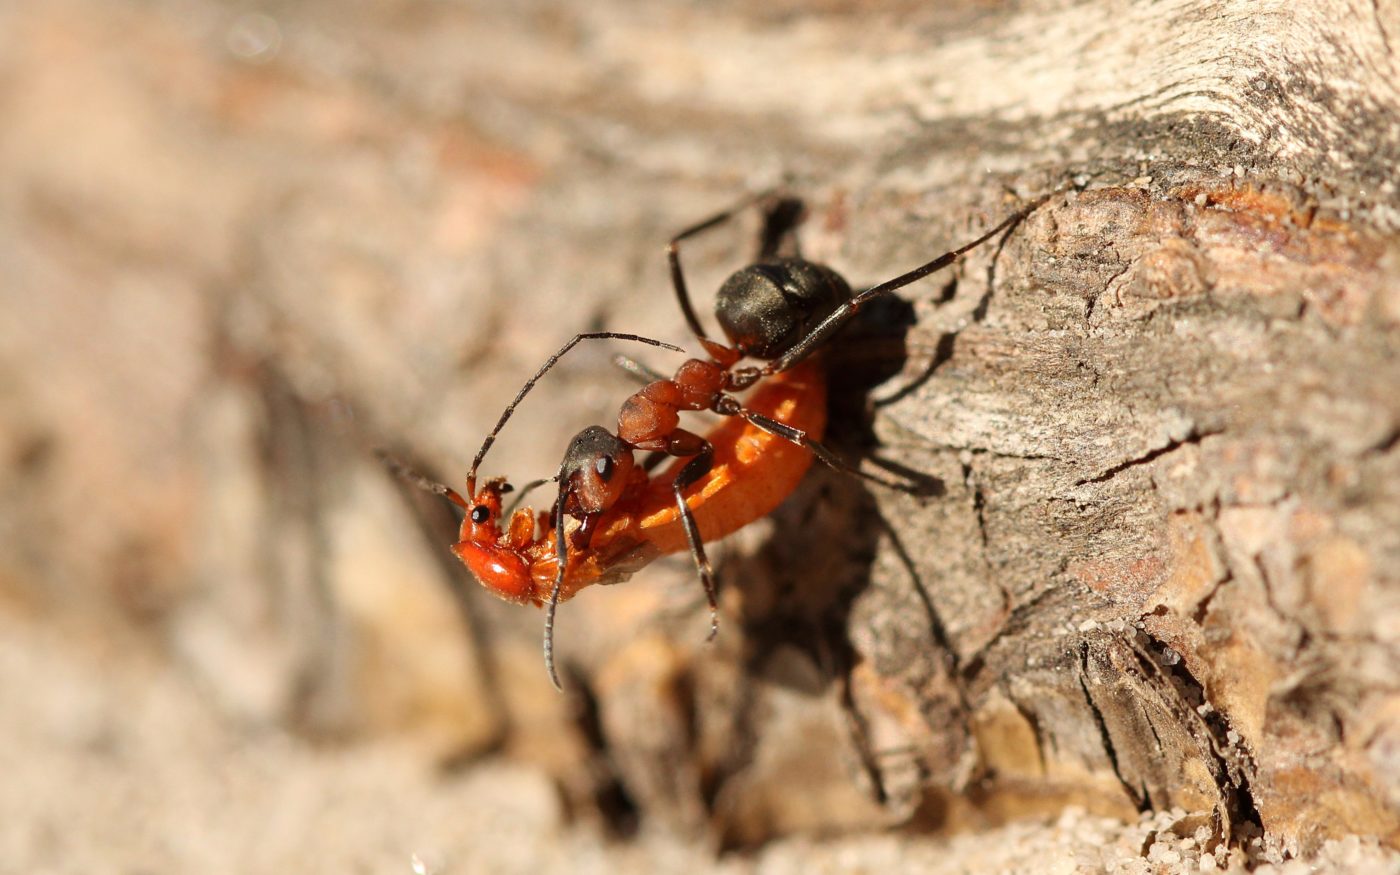 Common red soldier beetle, Rhagonycha fulva, and wood ant